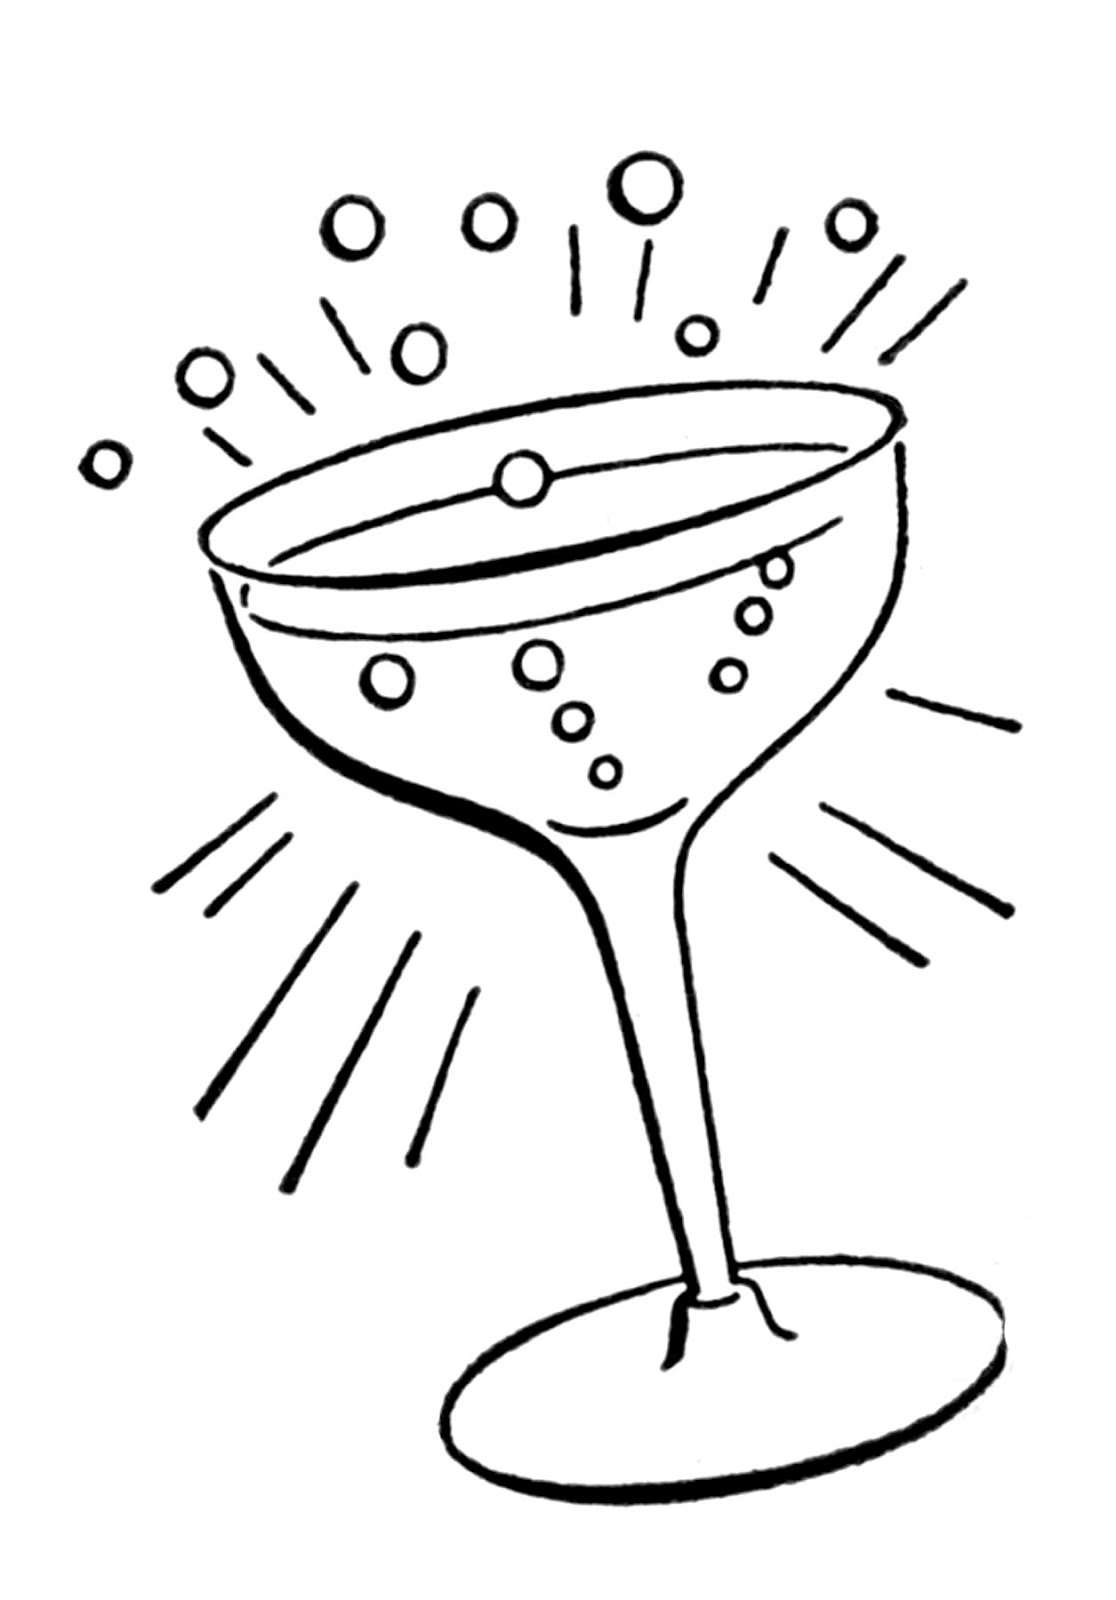 Retro Line Drawings - Cocktail Glass - The Graphics Fairy